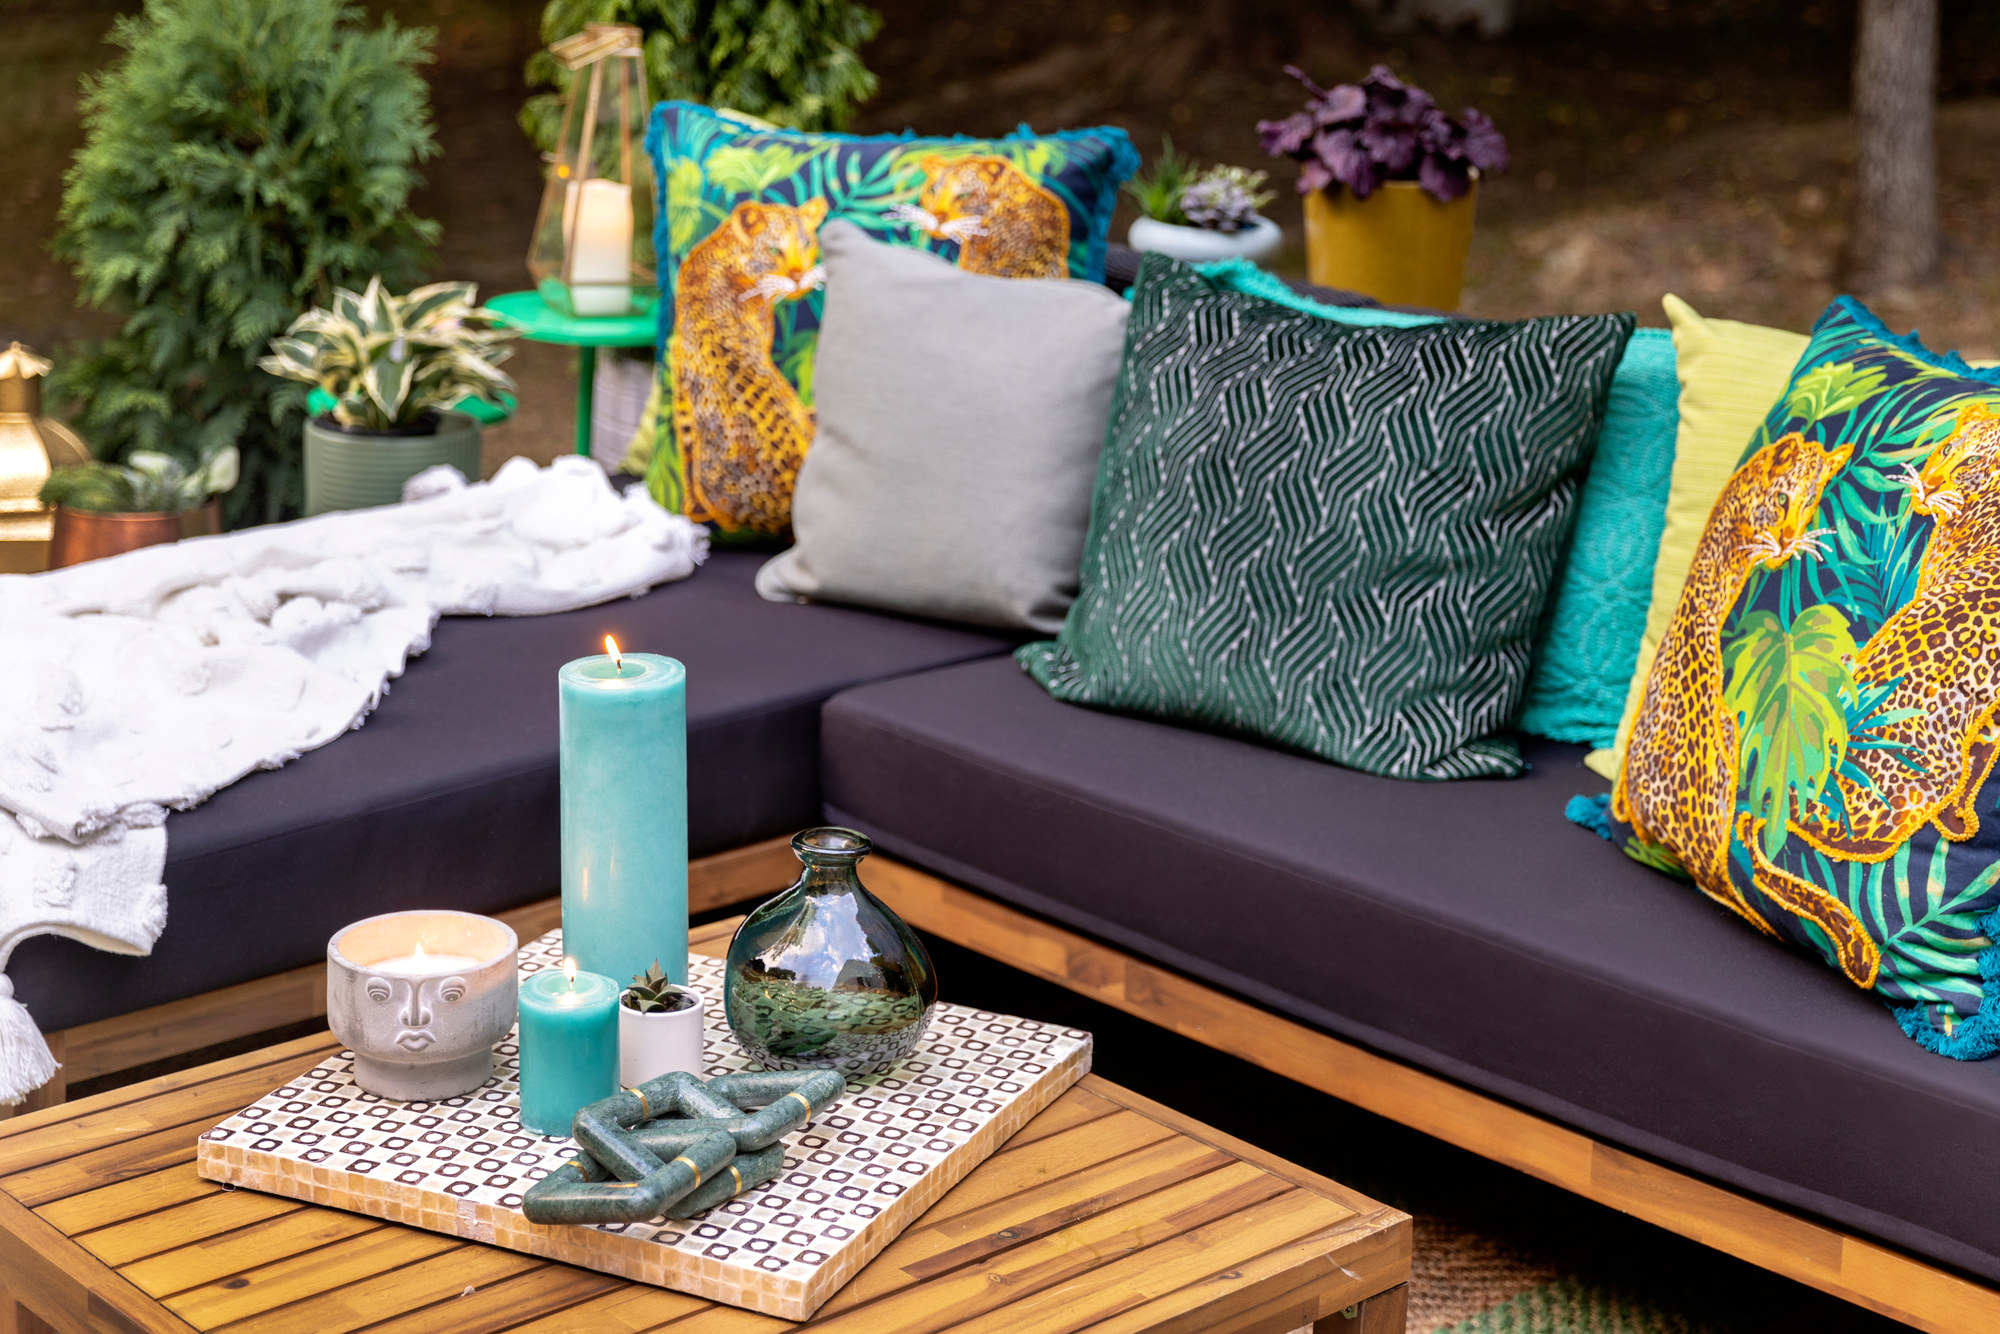 Outdoor seating with pillows placed near tables with candles and vases